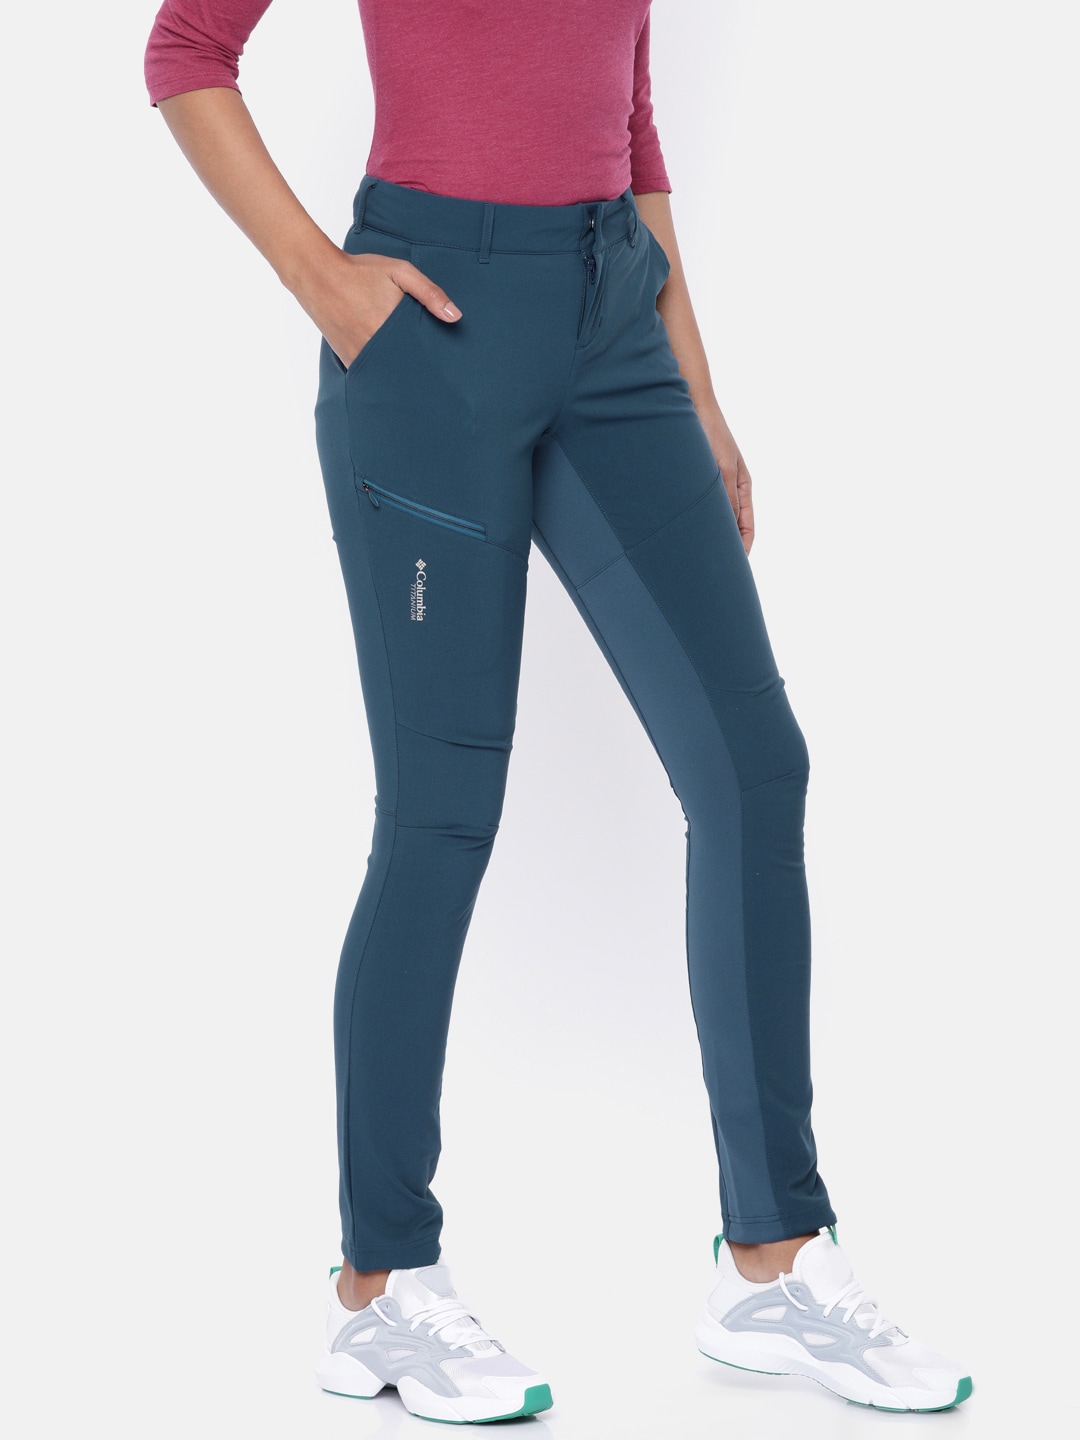 Columbia Women Teal Blue Solid Active Fit Titan Trail Hybrid Hiking Track Pants Price in India